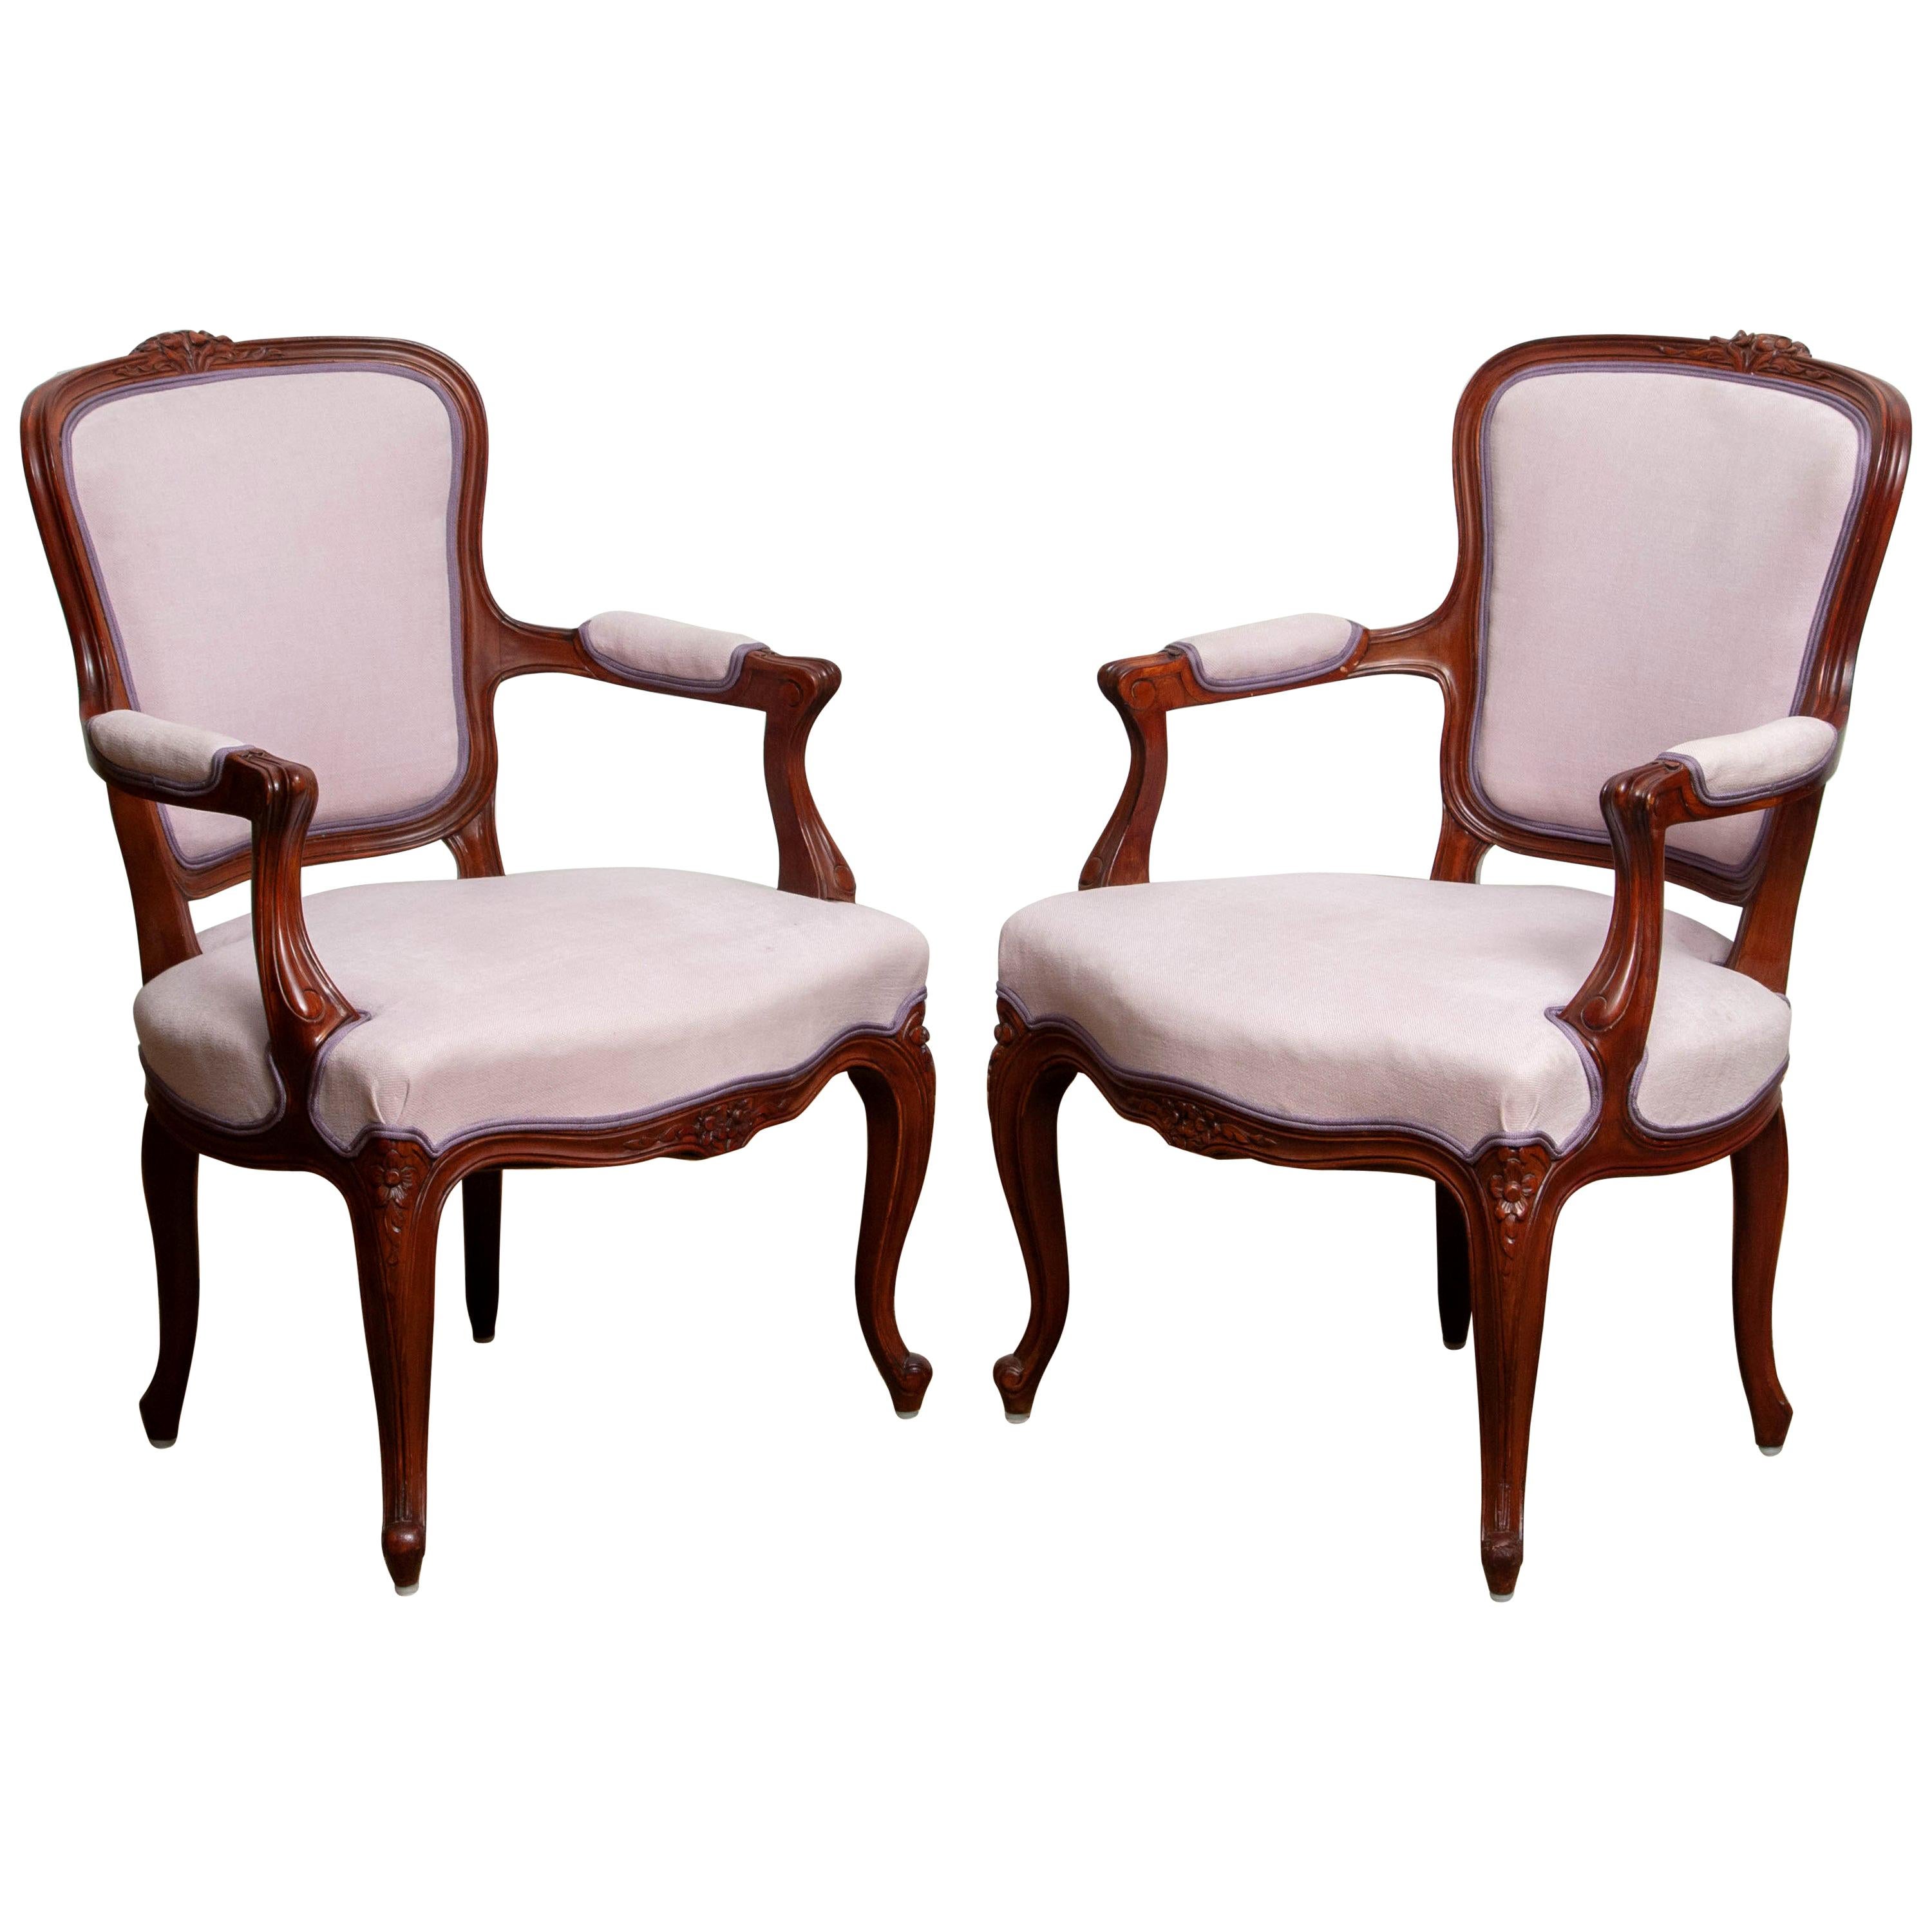 1950s Pair of Pink Swedish Rococo Bergères in the Shabby Chic Technique Chairs F